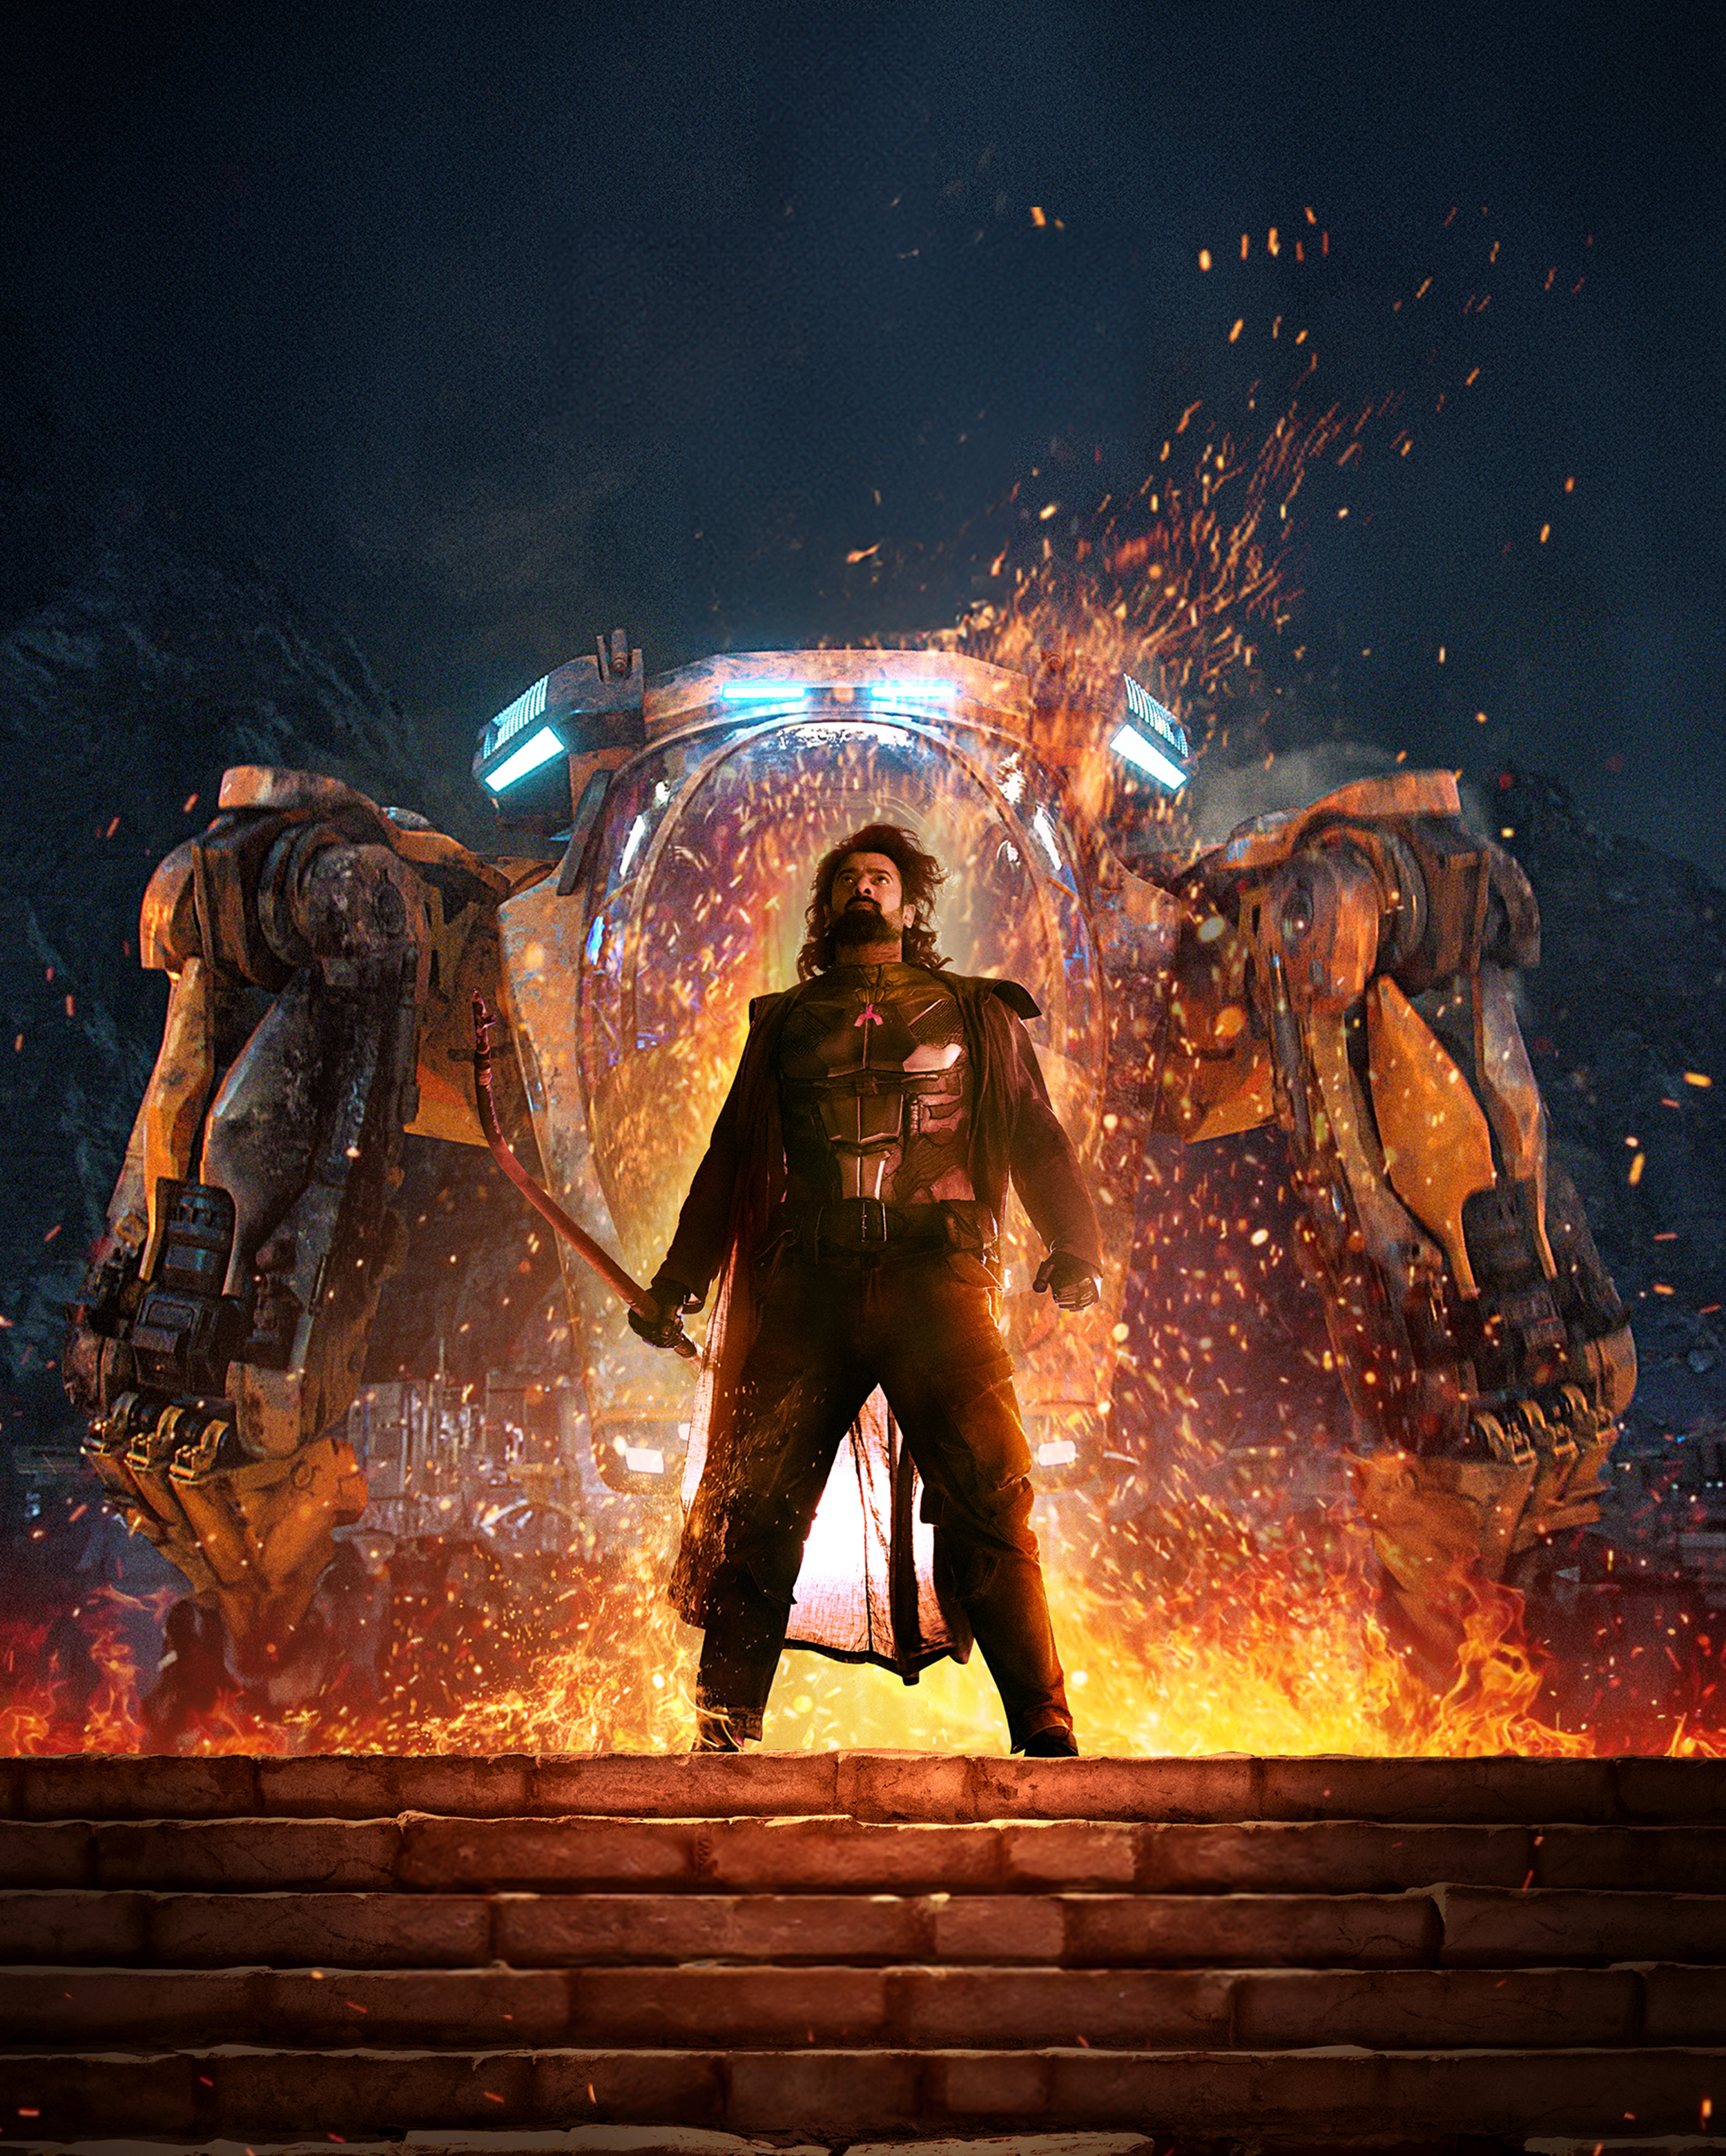 Bounty hunter Bhairava (Prabhas), in a leather outfit and holding a curved sword, stands in front of a squat, wide mech surrounded by sparks in a promo image for the Indian sci-fi blockbuster Kalki 2898 AD